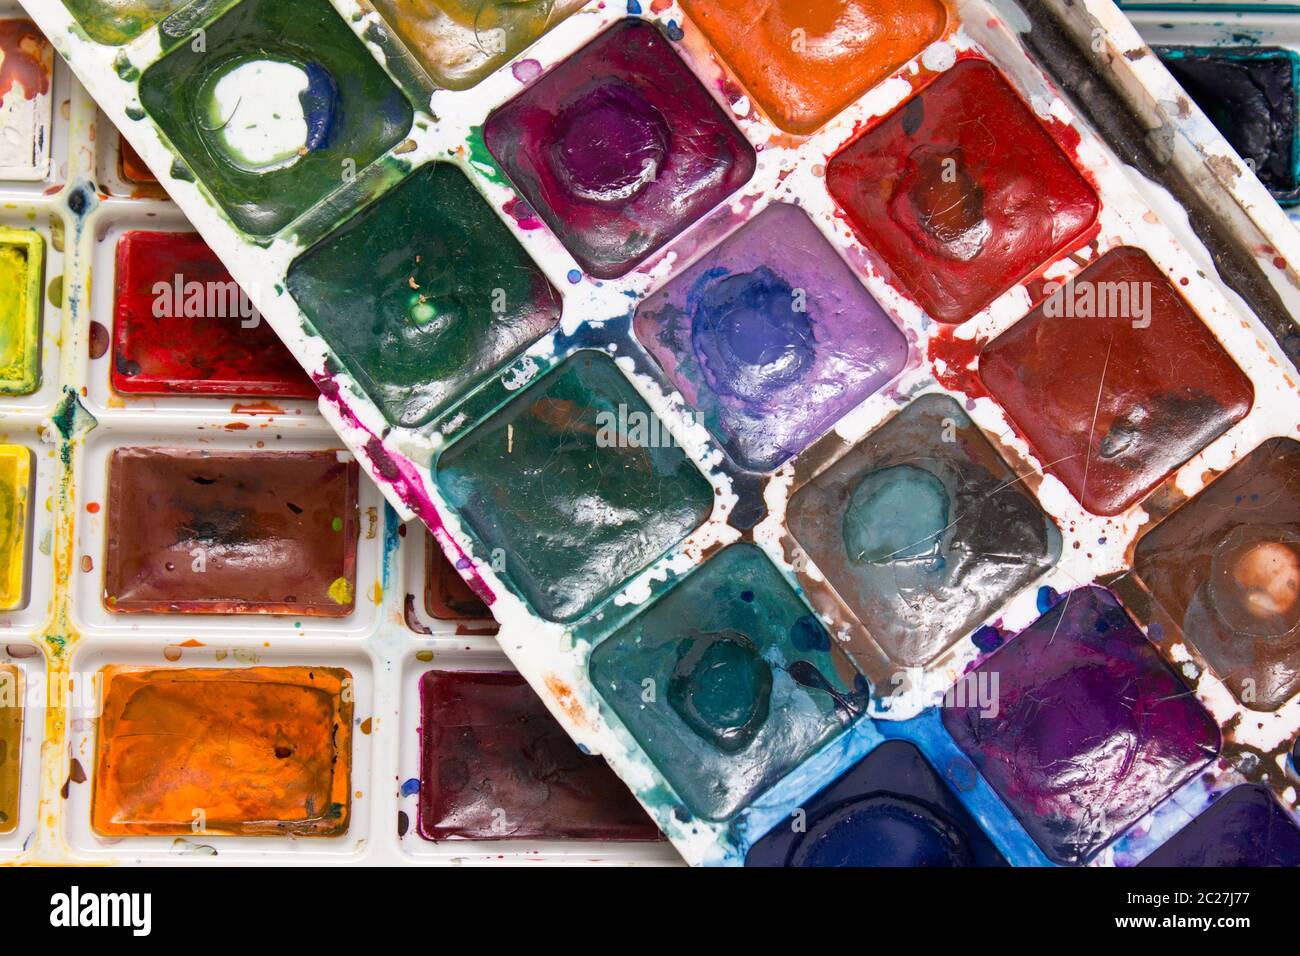 Set of Water Colors with Brush in Box Stock Illustration - Illustration of  paintings, painter: 41266545